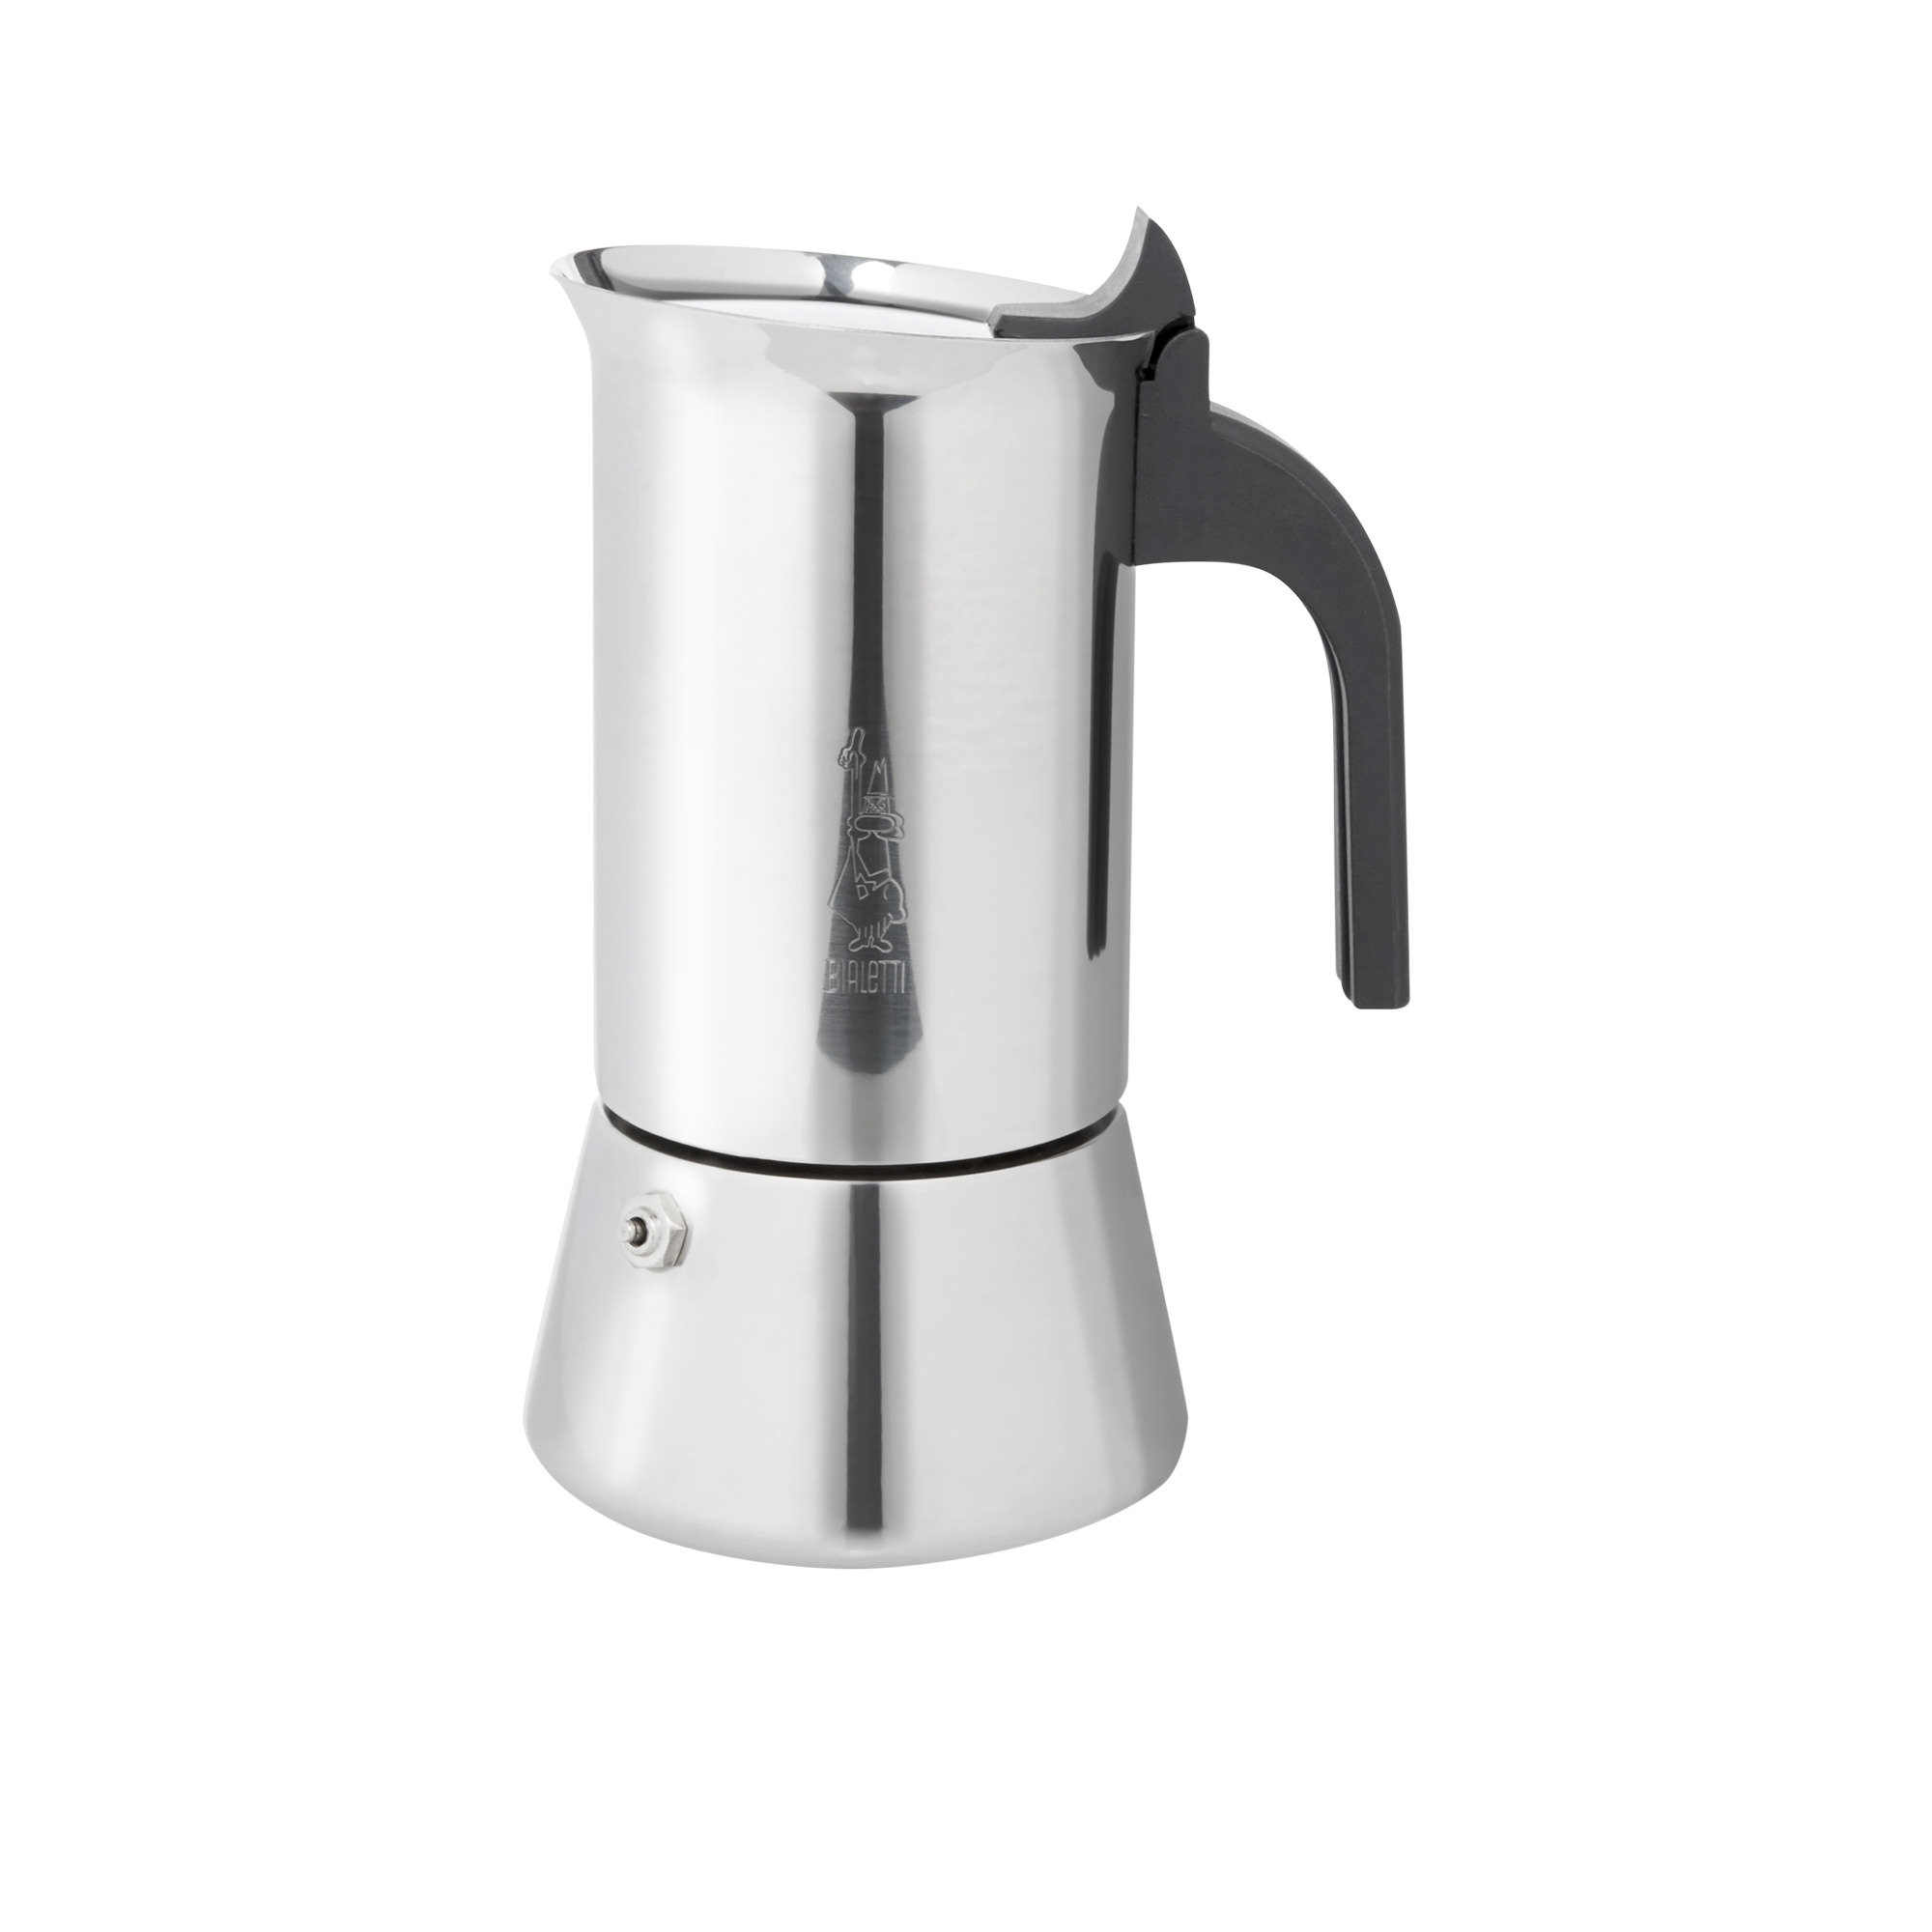 Bialetti Venus Stainless Steel Induction Espresso Maker 6 Cup Image 1